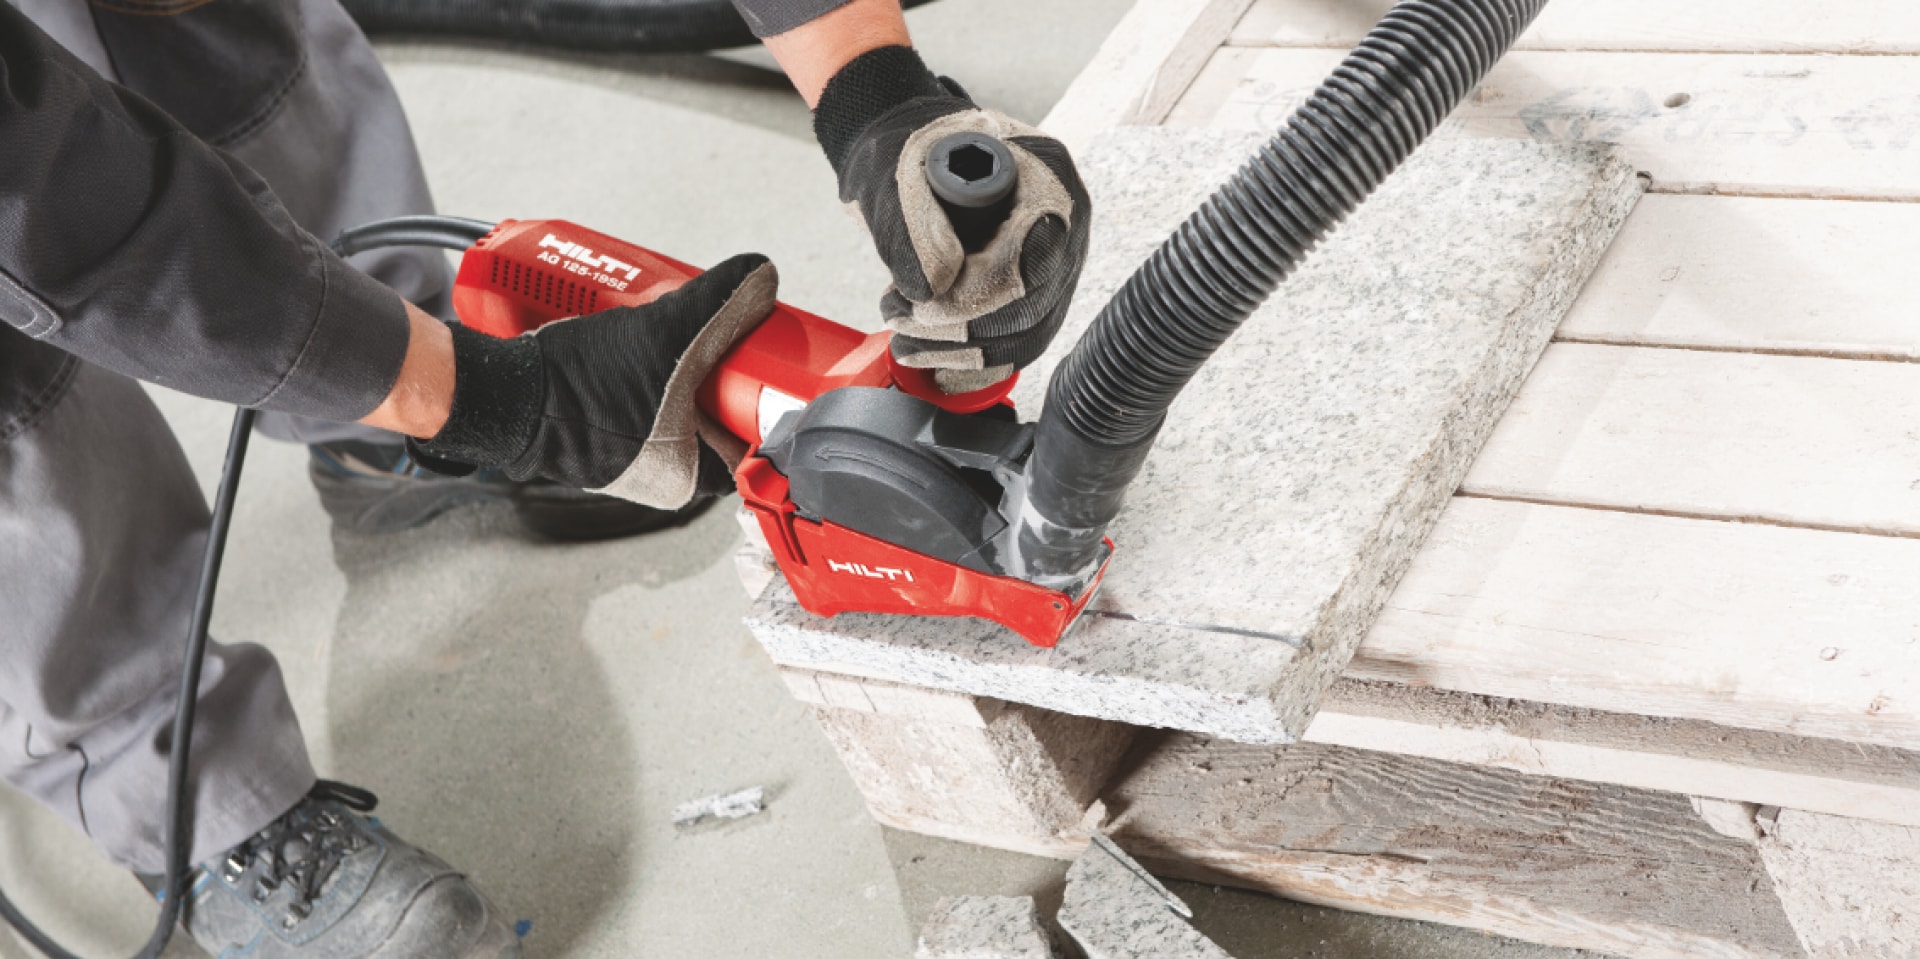 Dust extraction is easier than ever with the SC 70W-A22 connected to a universal vacuum cleaner